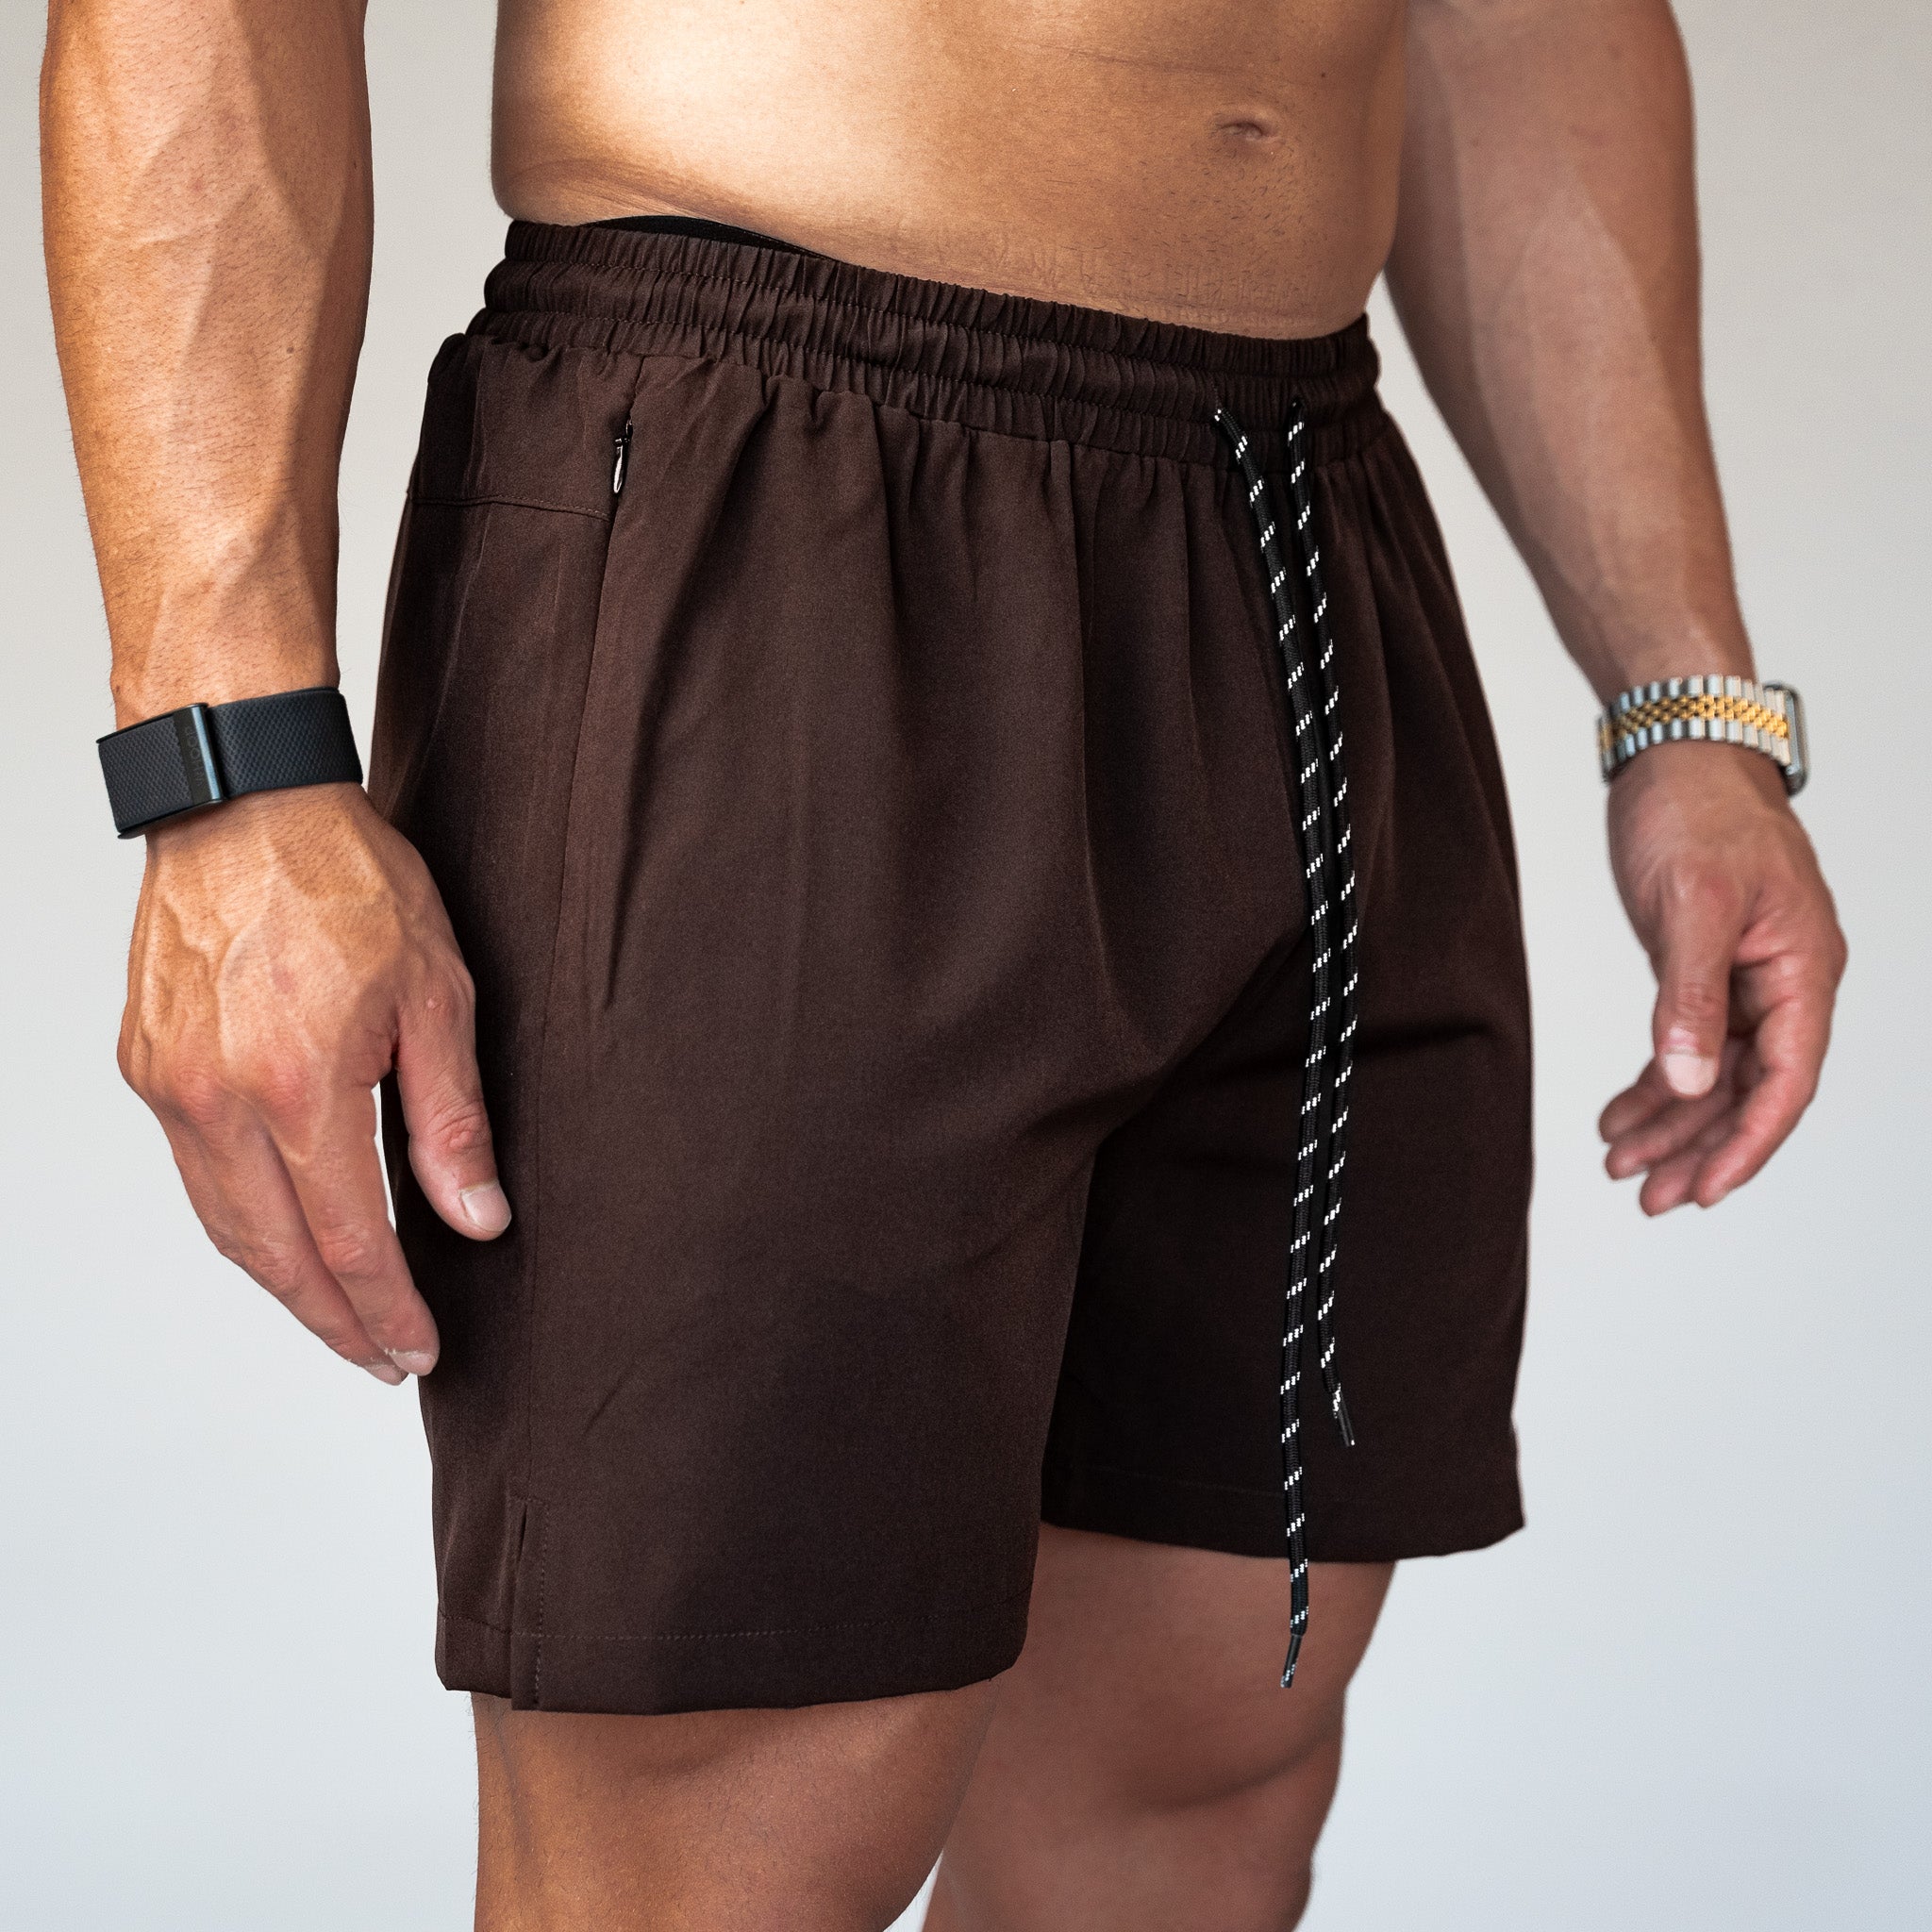 Uphill Performance Shorts Brown